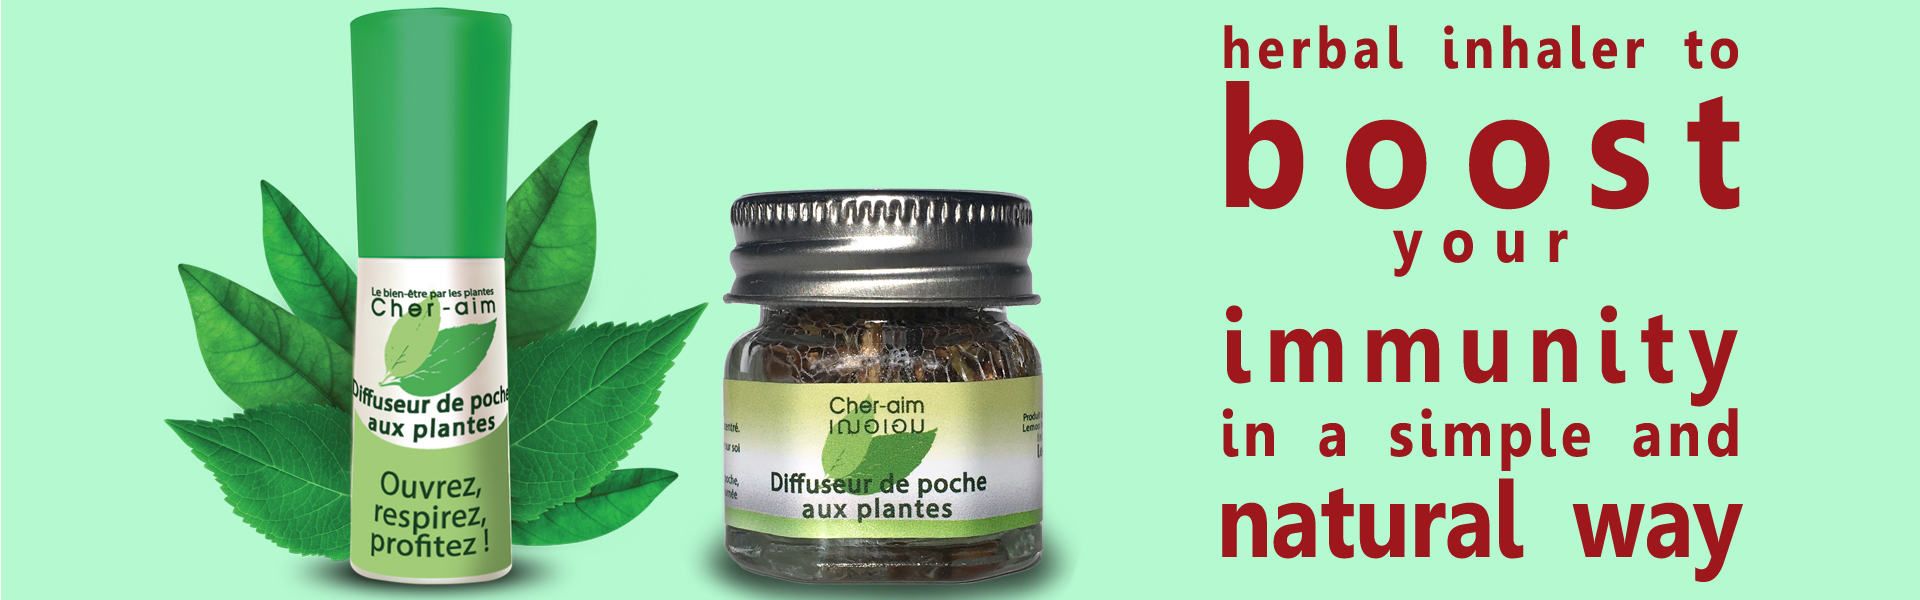 The pocket herbal inhaler : a simple, natural & handy ally to avoid getting sick.